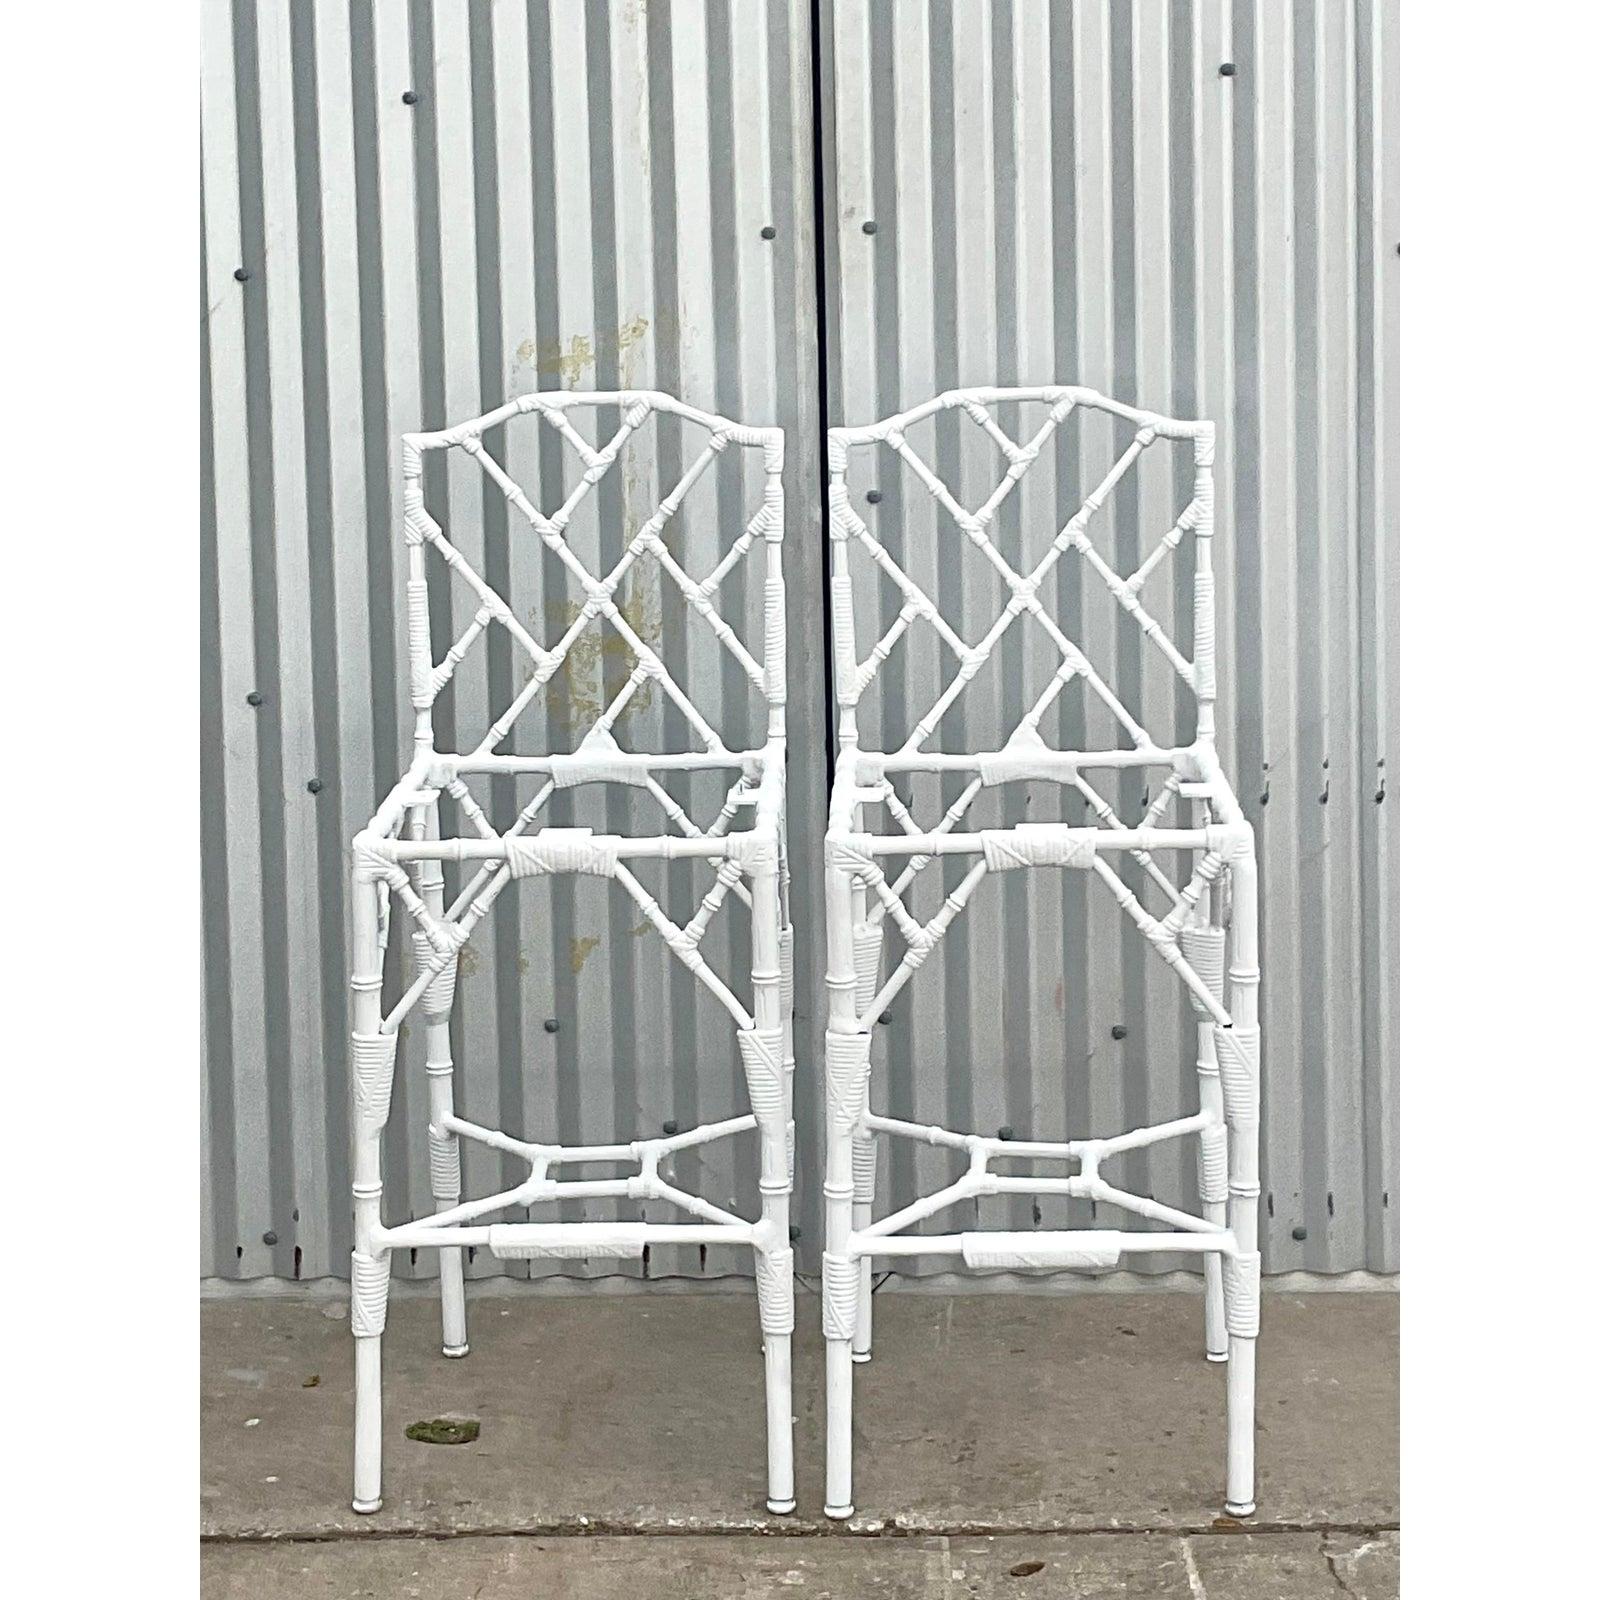 Fantastic pair of vintage Coastal Veneman wrought iron barstools. Beautiful Chinese Chippendale in a bamboo design. Matte white finish. Acquired from a Palm Beach estate.